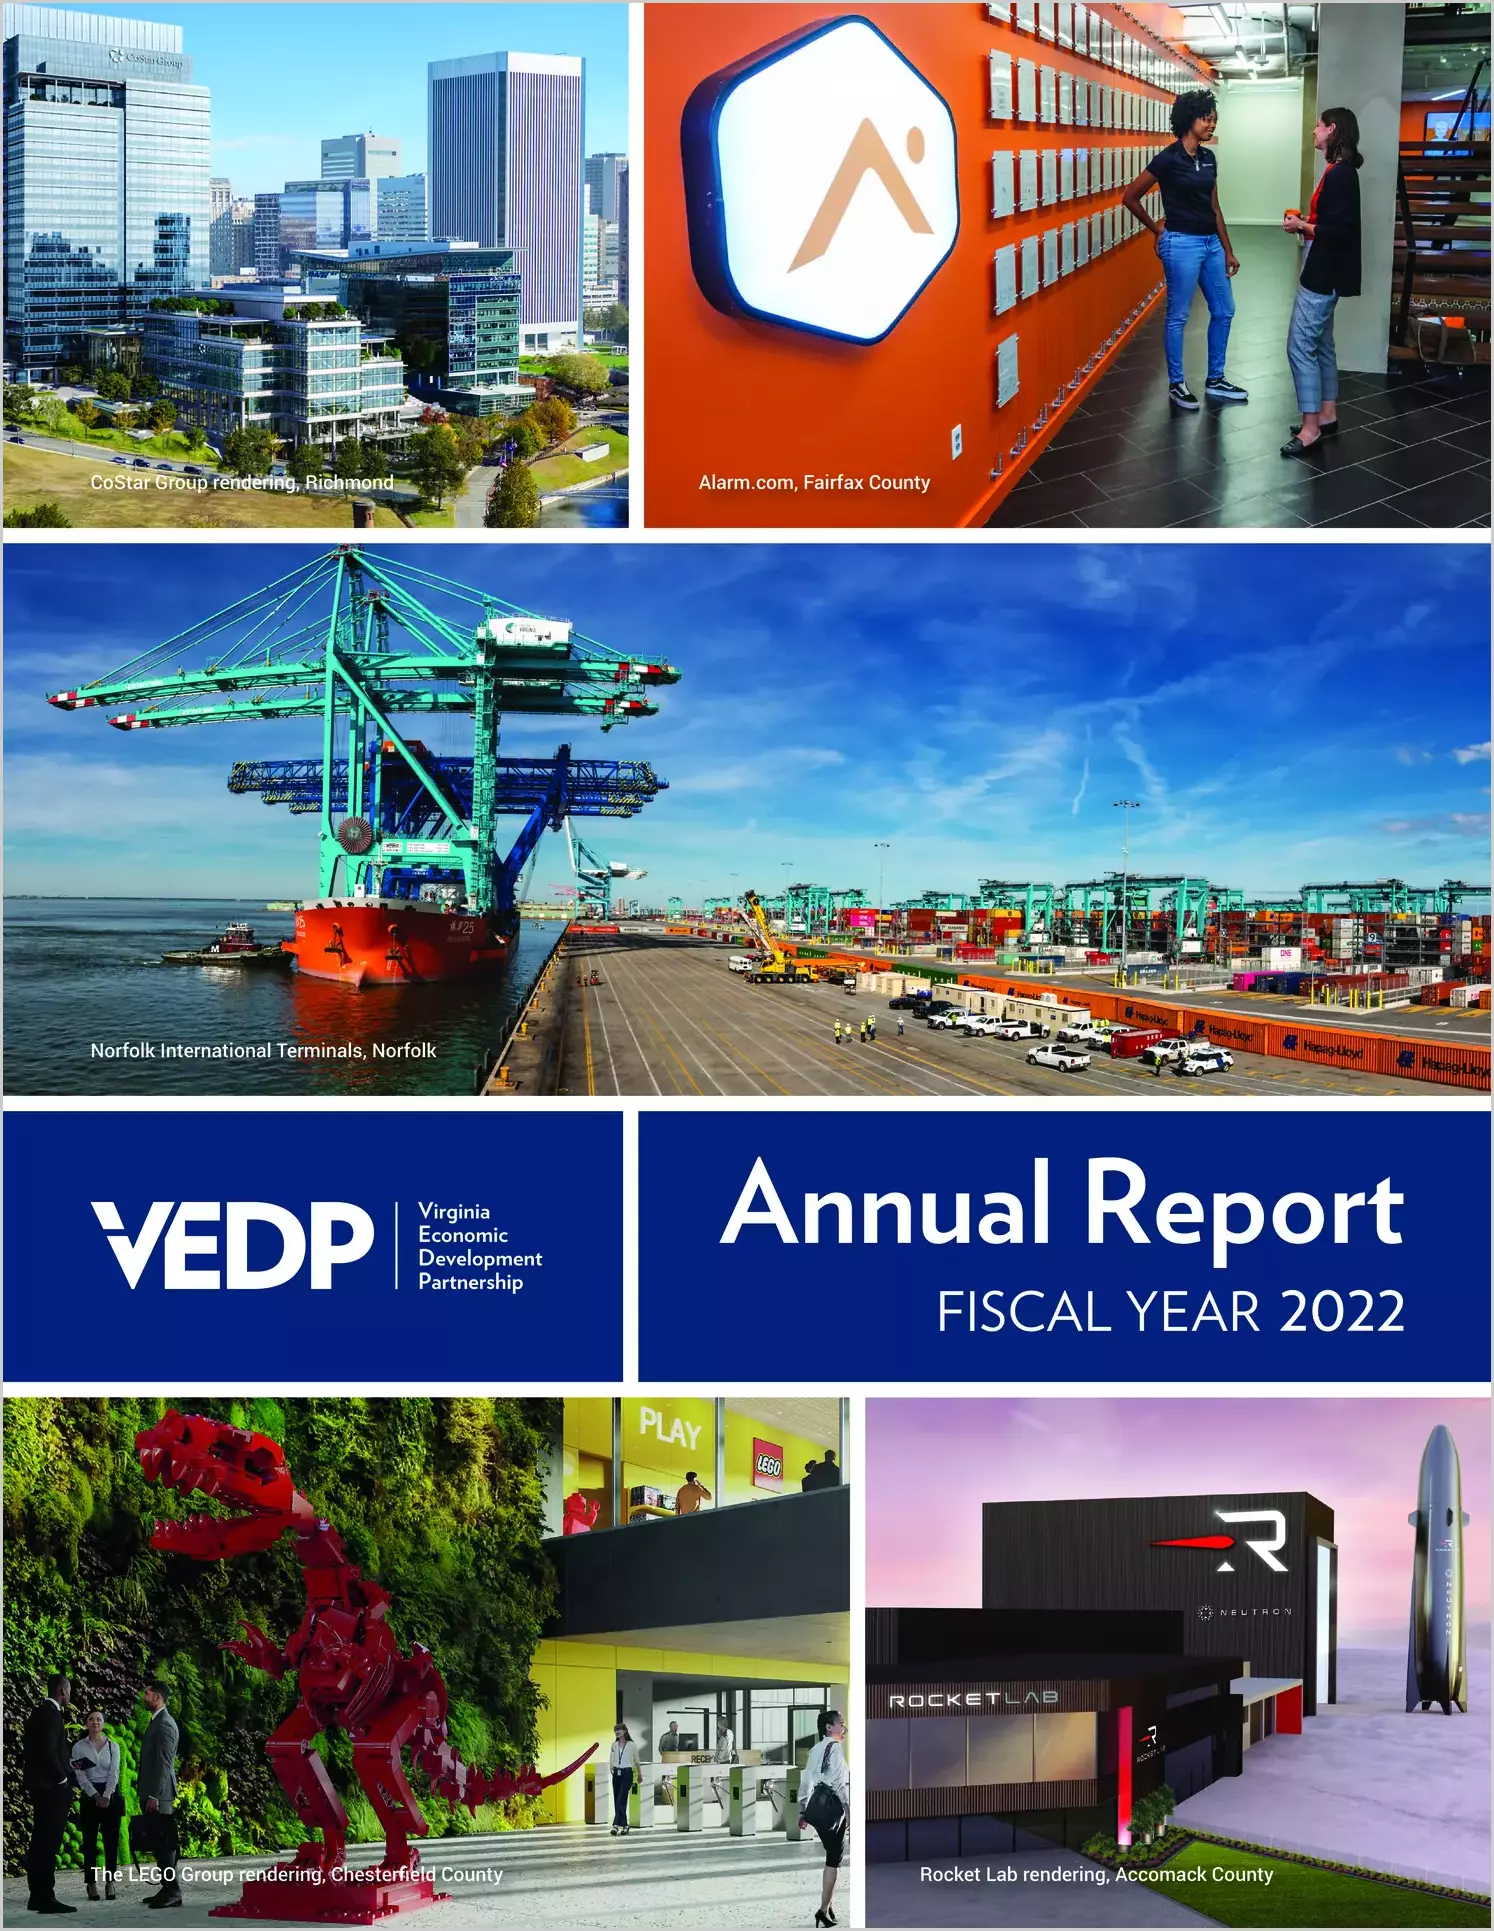 Virginia Economic Development Partnership Financial Statements for the year ended June 30, 2022